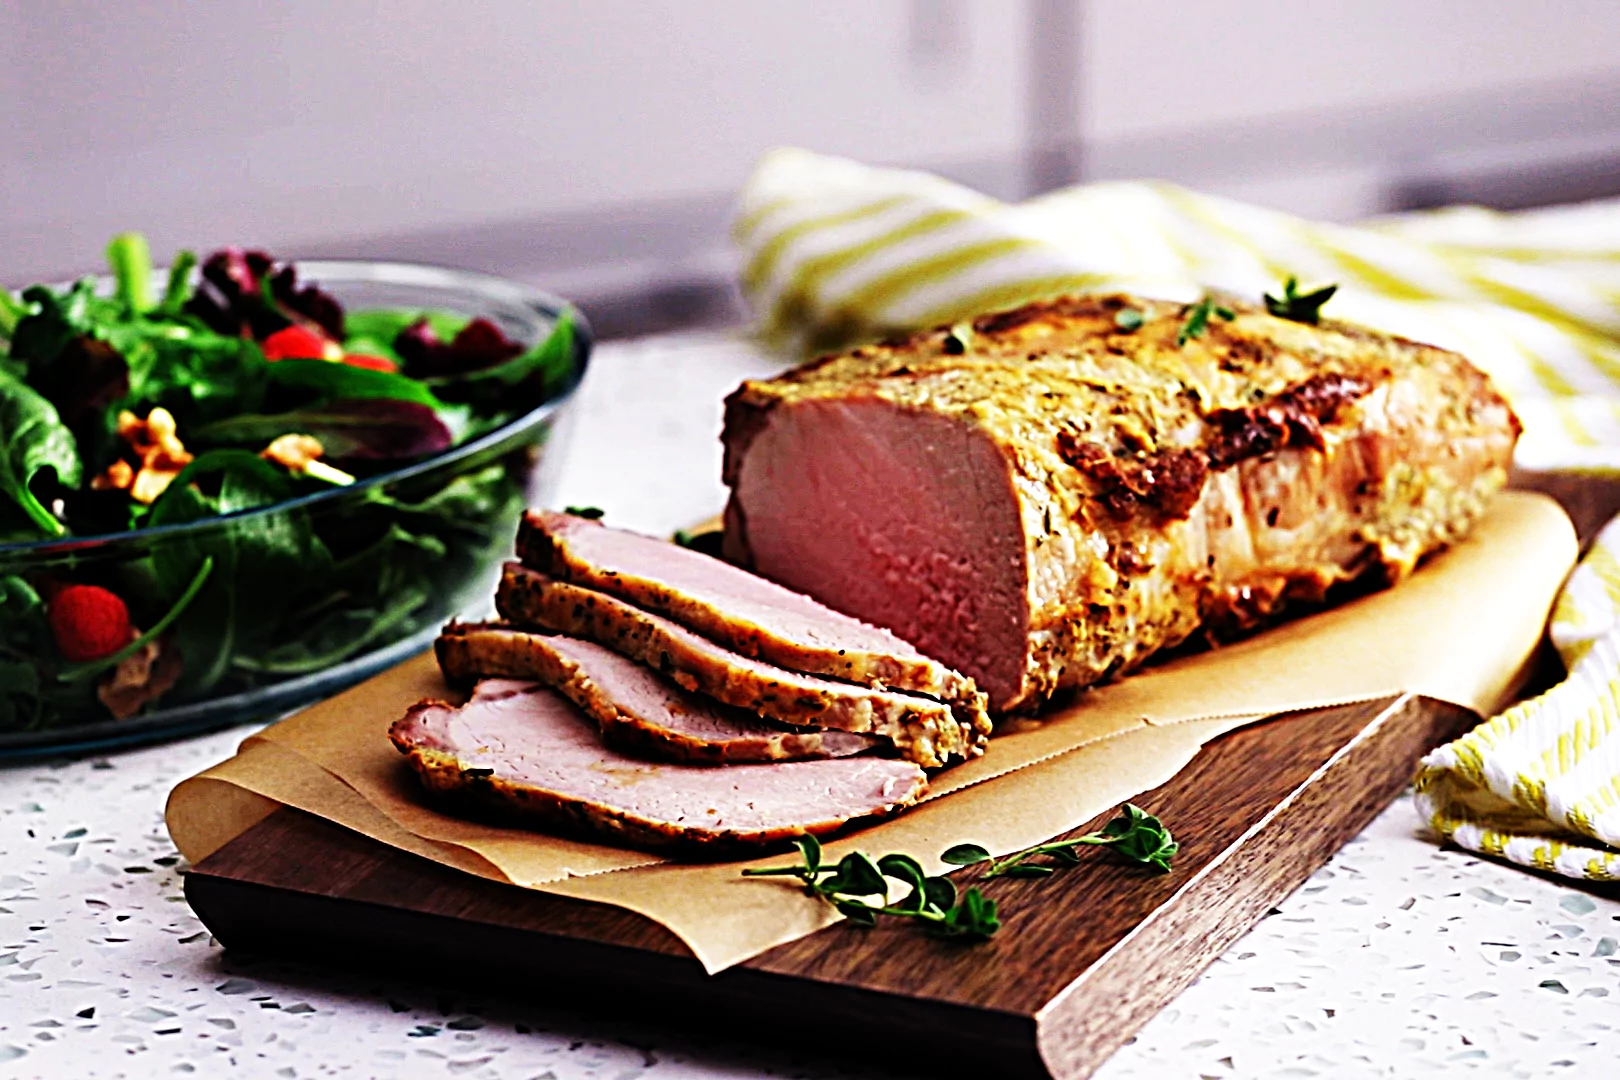 Stupid-Easy Recipe for Whole30 Roasted Pork Loin (#1 Top-Rated)